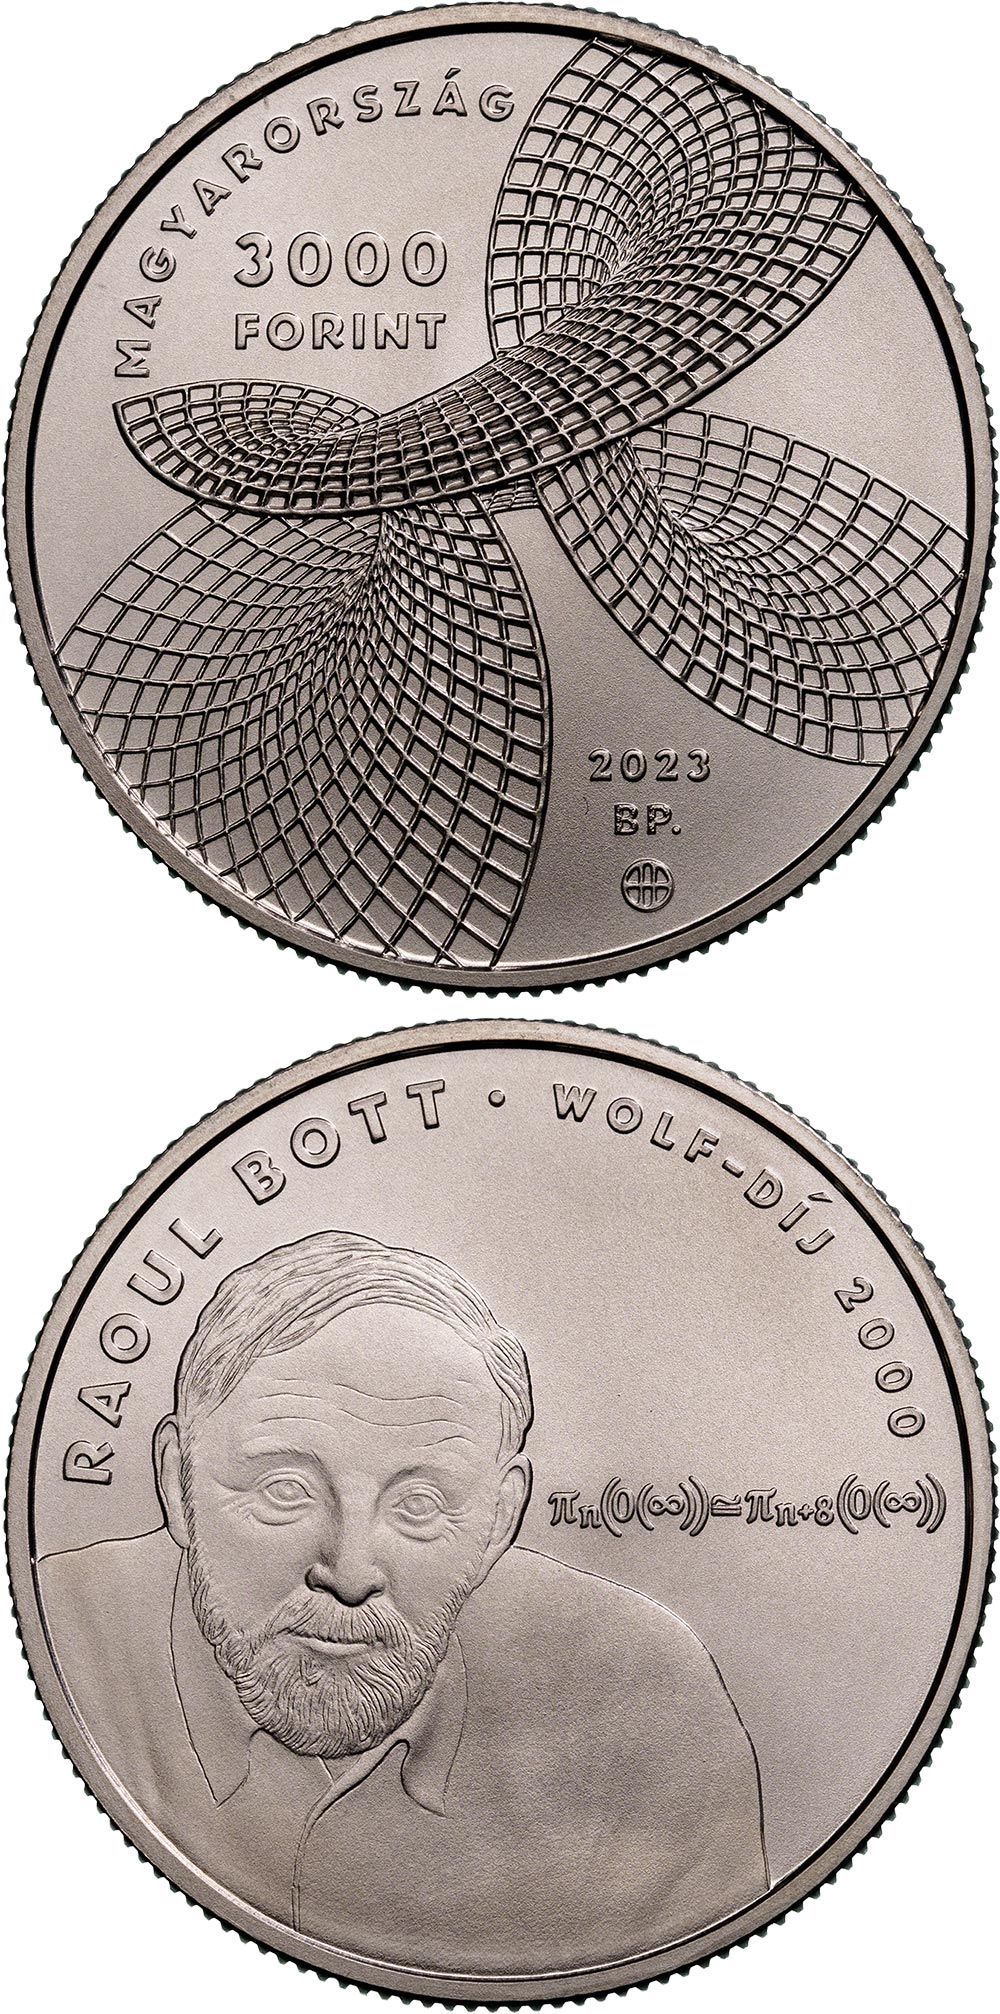 Image of 2000 forint coin - Raoul Bott | Hungary 2023.  The Copper–Nickel (CuNi) coin is of BU quality.